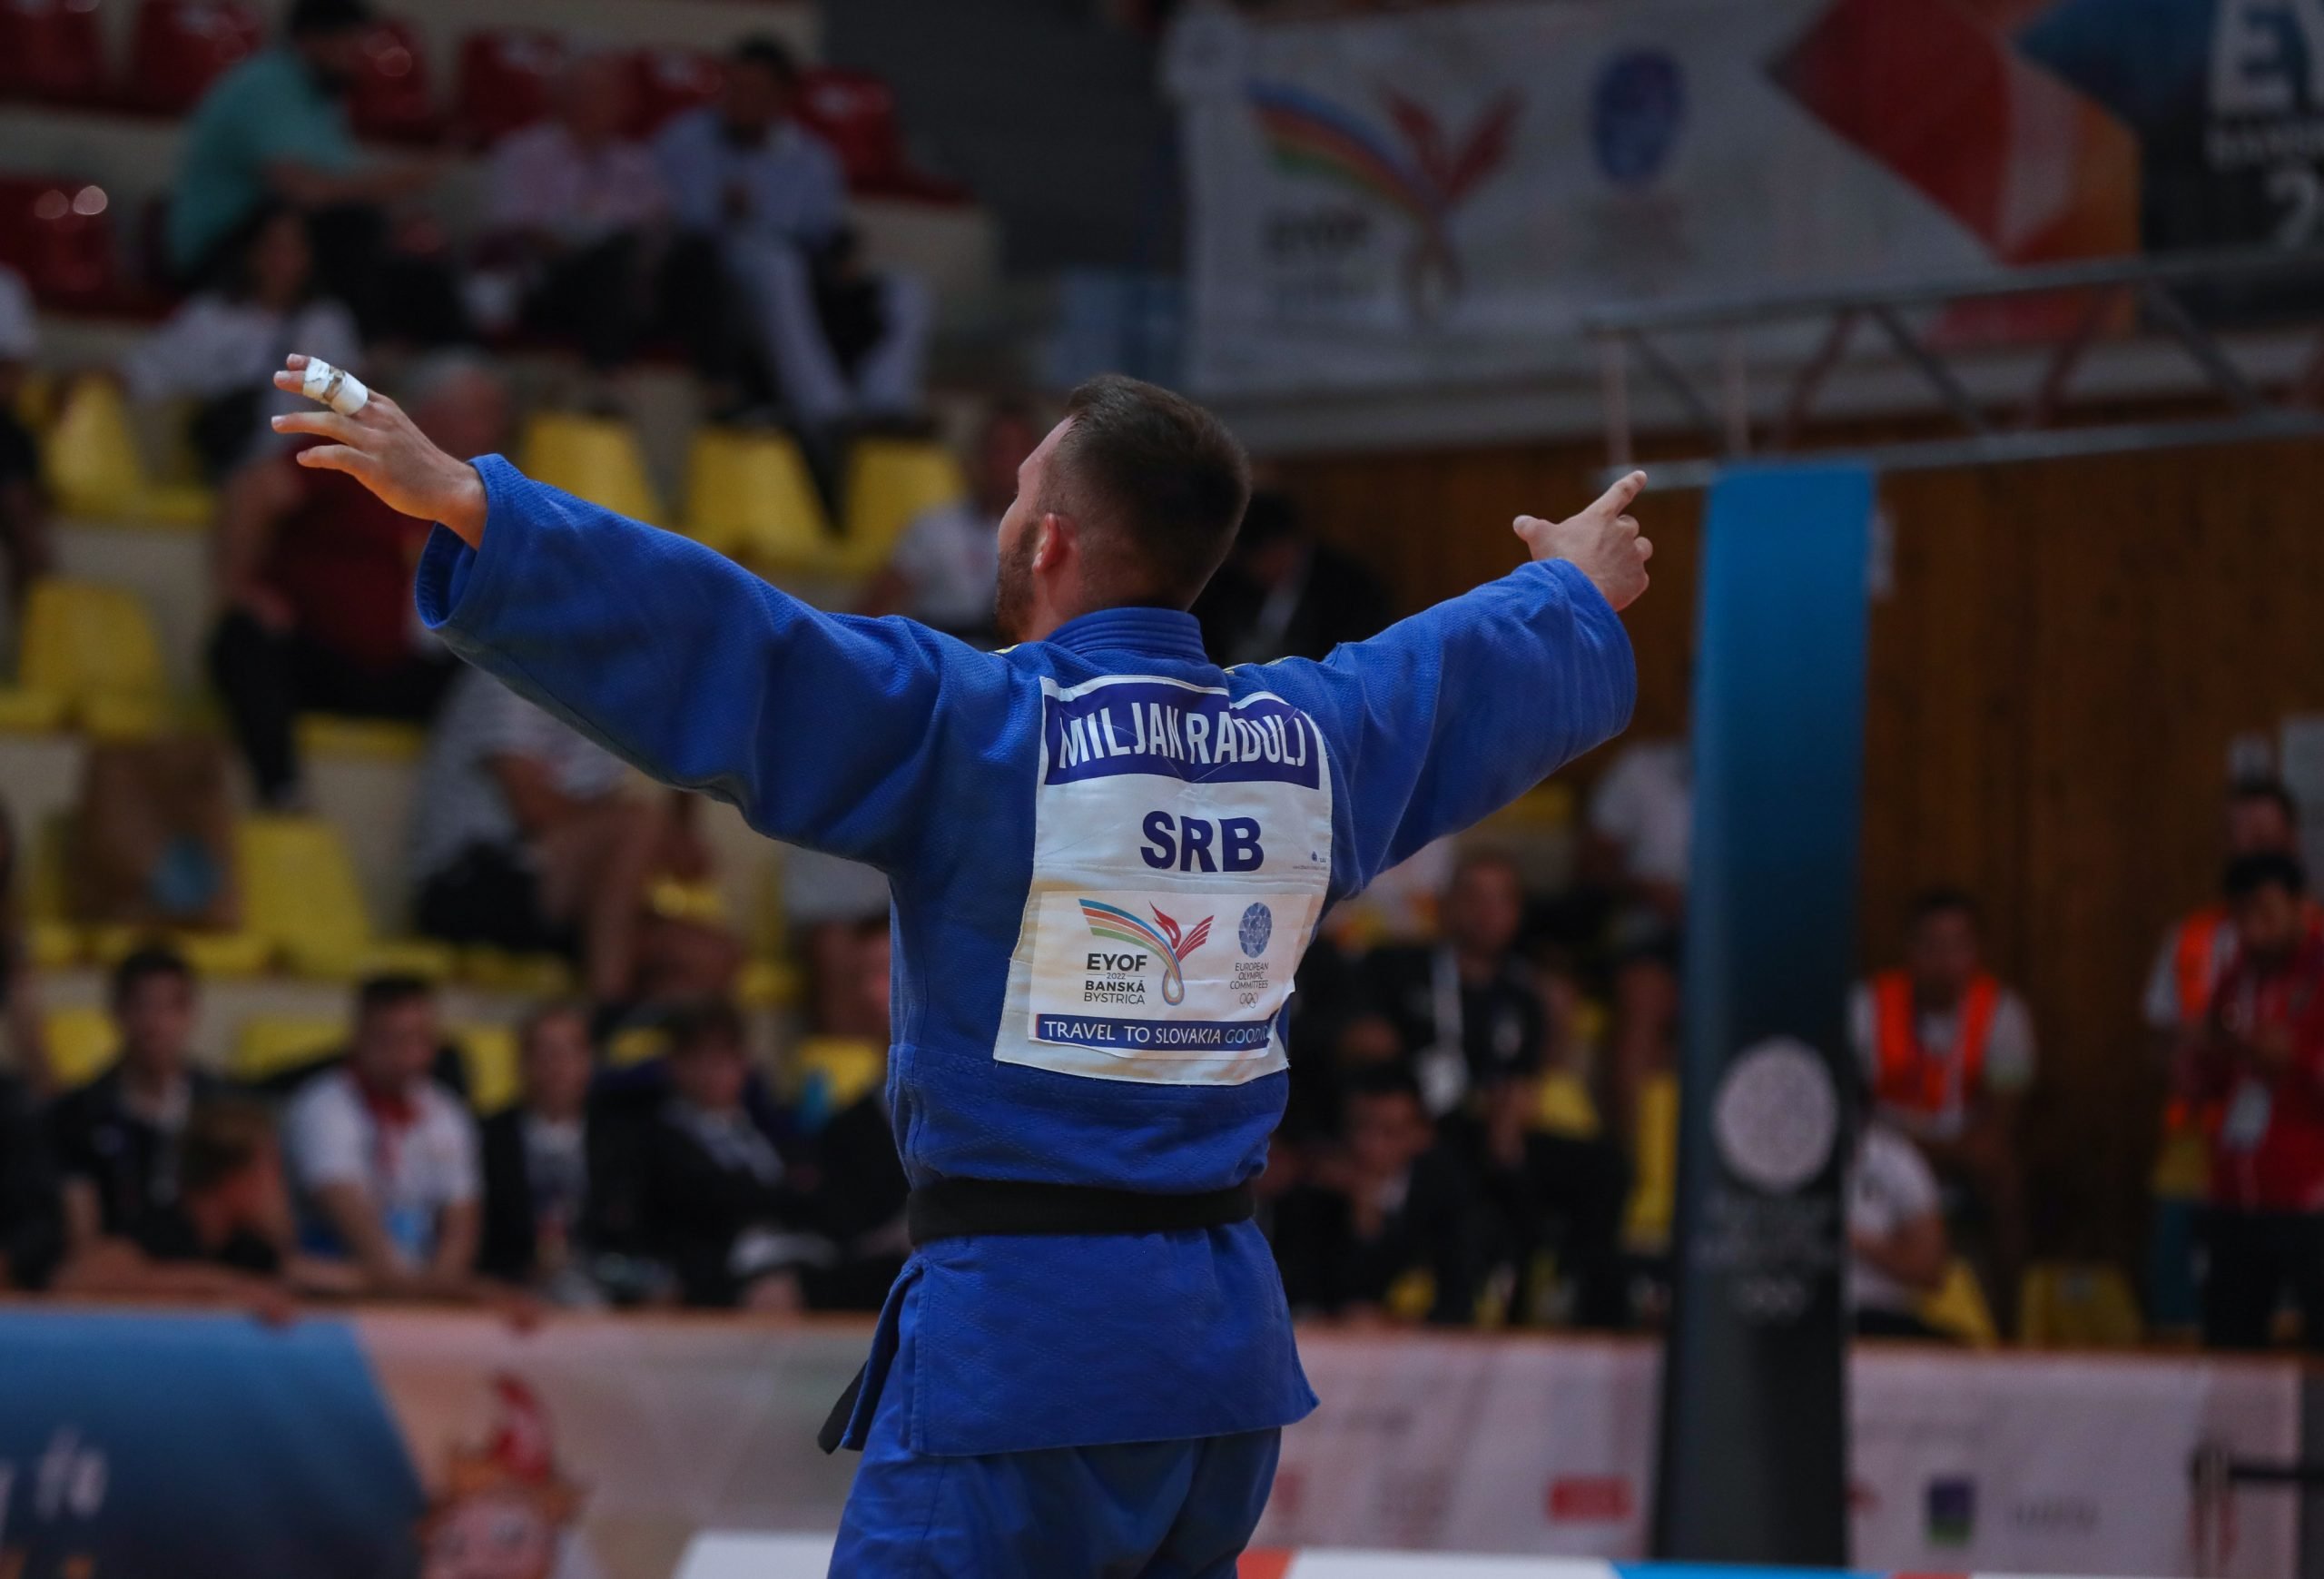 RADULJ TAKES SERBIA TO THE TOP THREE OF THE MEDAL TABLE￼